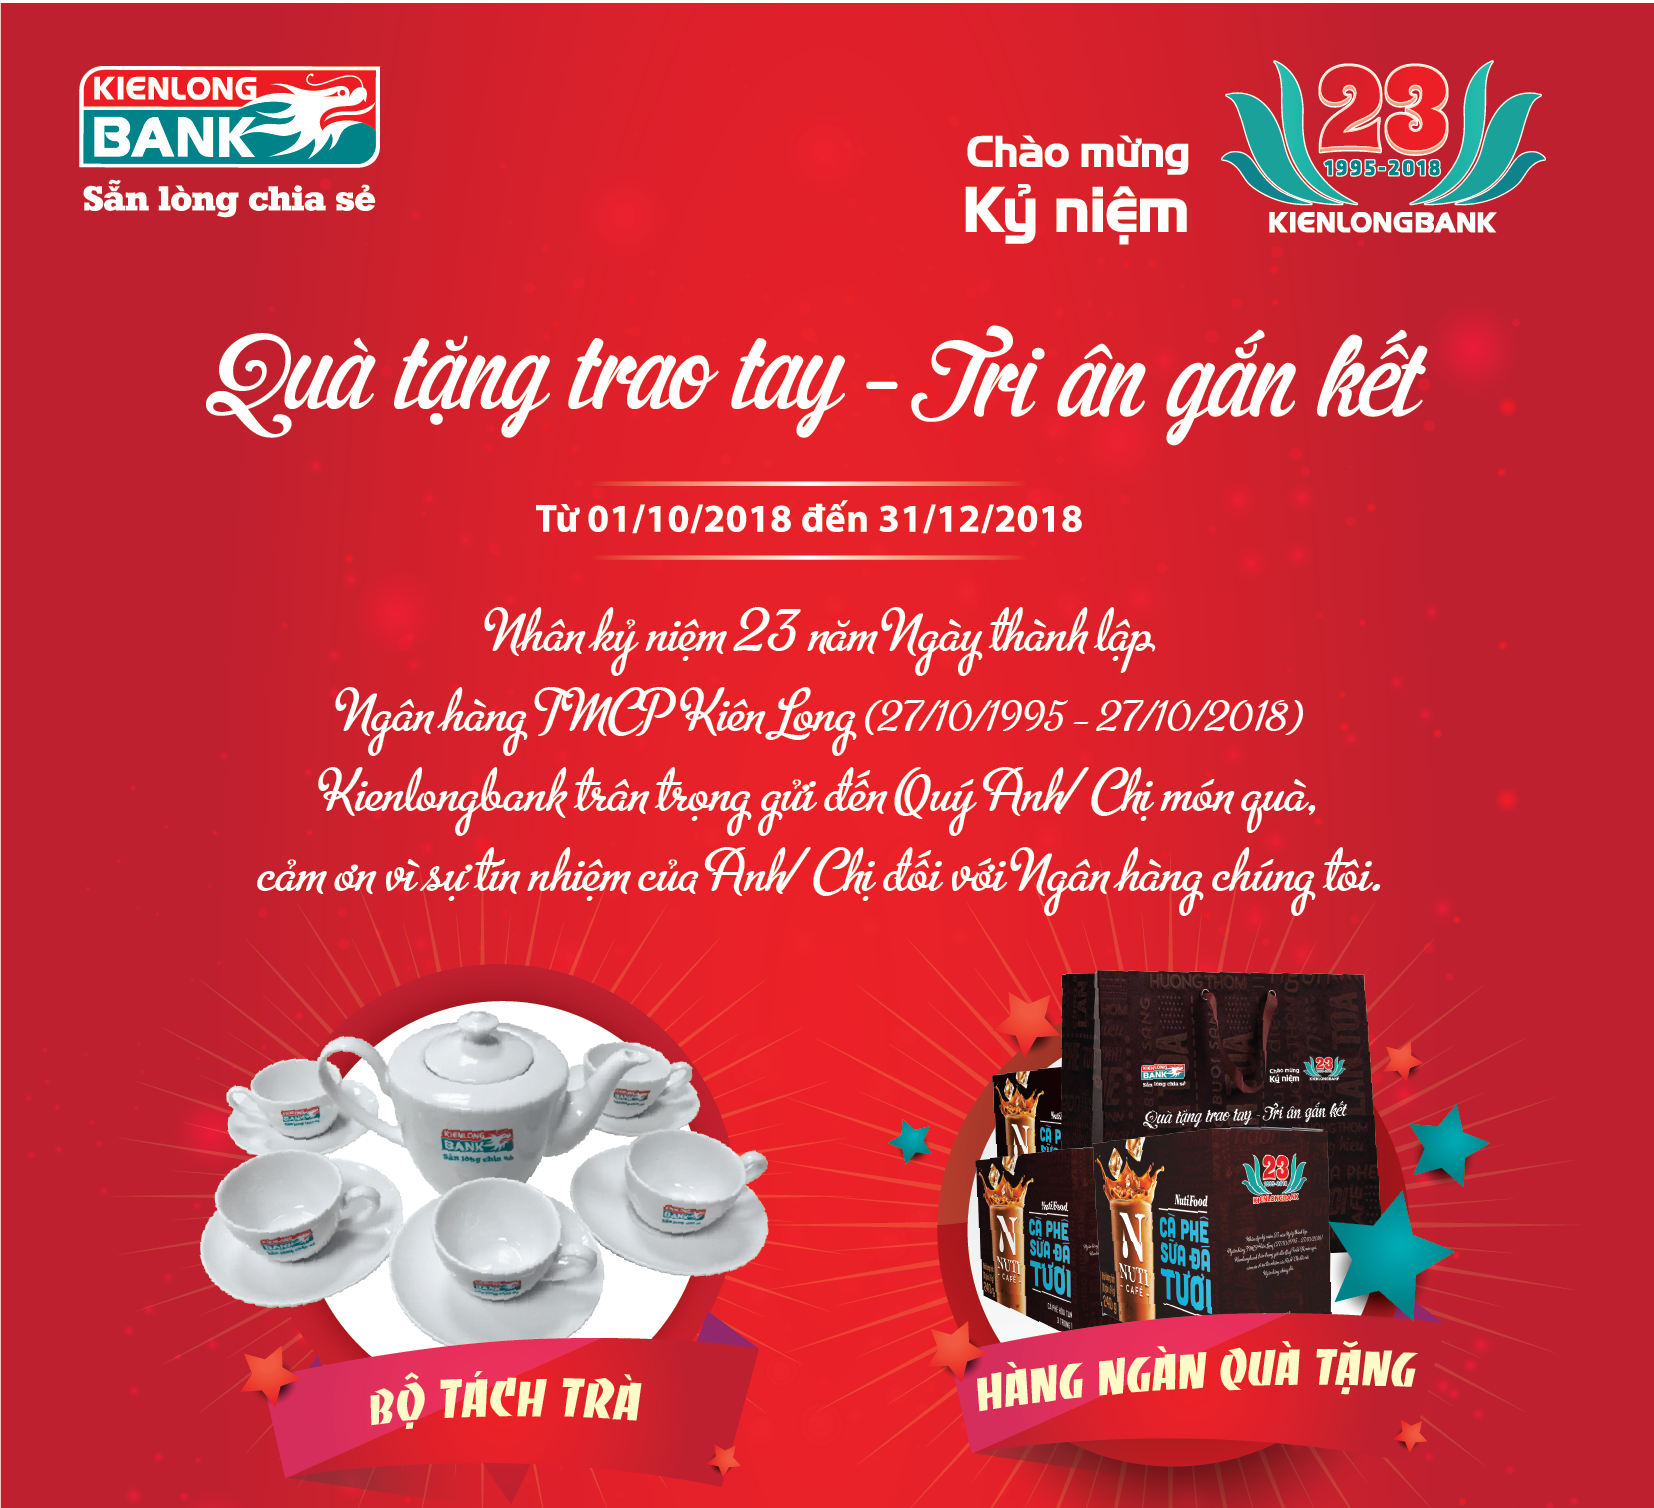 Handing gifts – Be grateful to customer for connecting in occasion of Kienlongbank 23rd Founding Anniversary